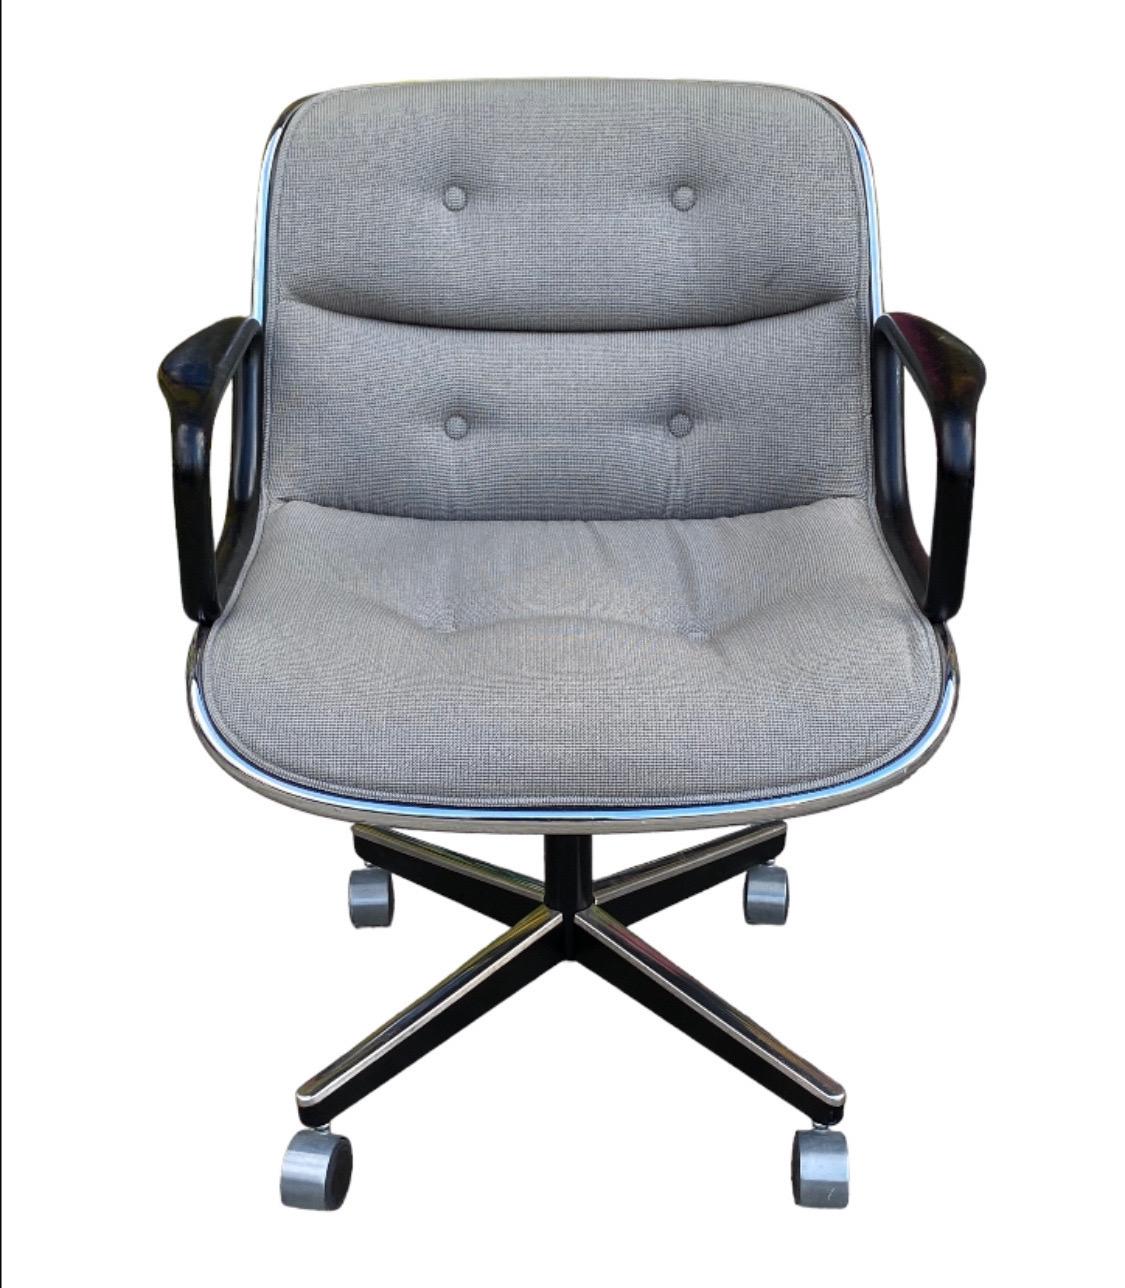 Knoll Office Desk Chair designed by Charles Pollock In Good Condition For Sale In Brooklyn, NY